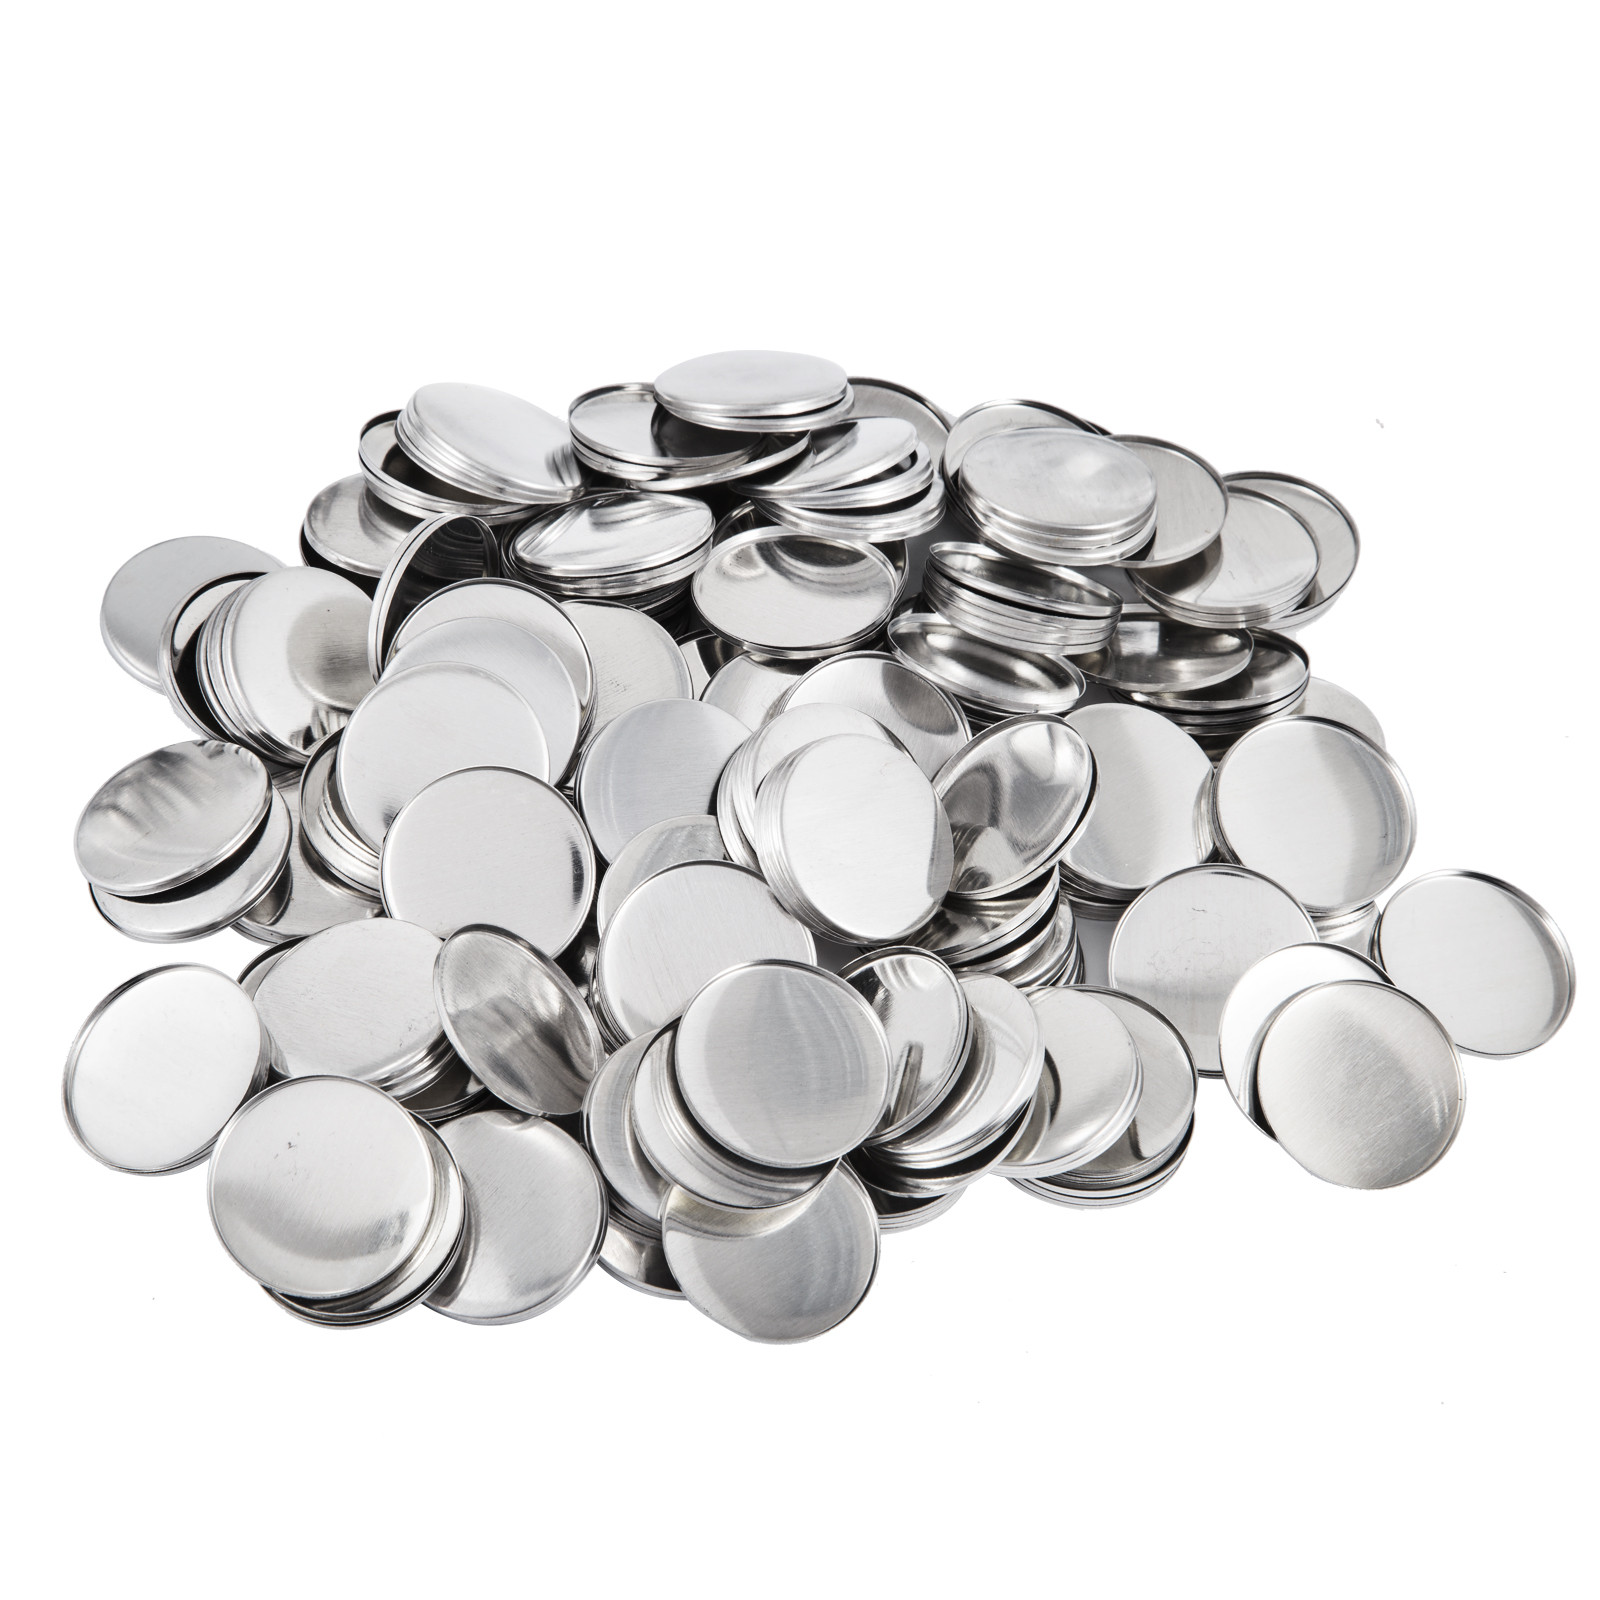 Diy Badge Button Maker Supplies/parts Metal Pin Back 58mm Round 1000 Parts Us от Vevor Many GEOs